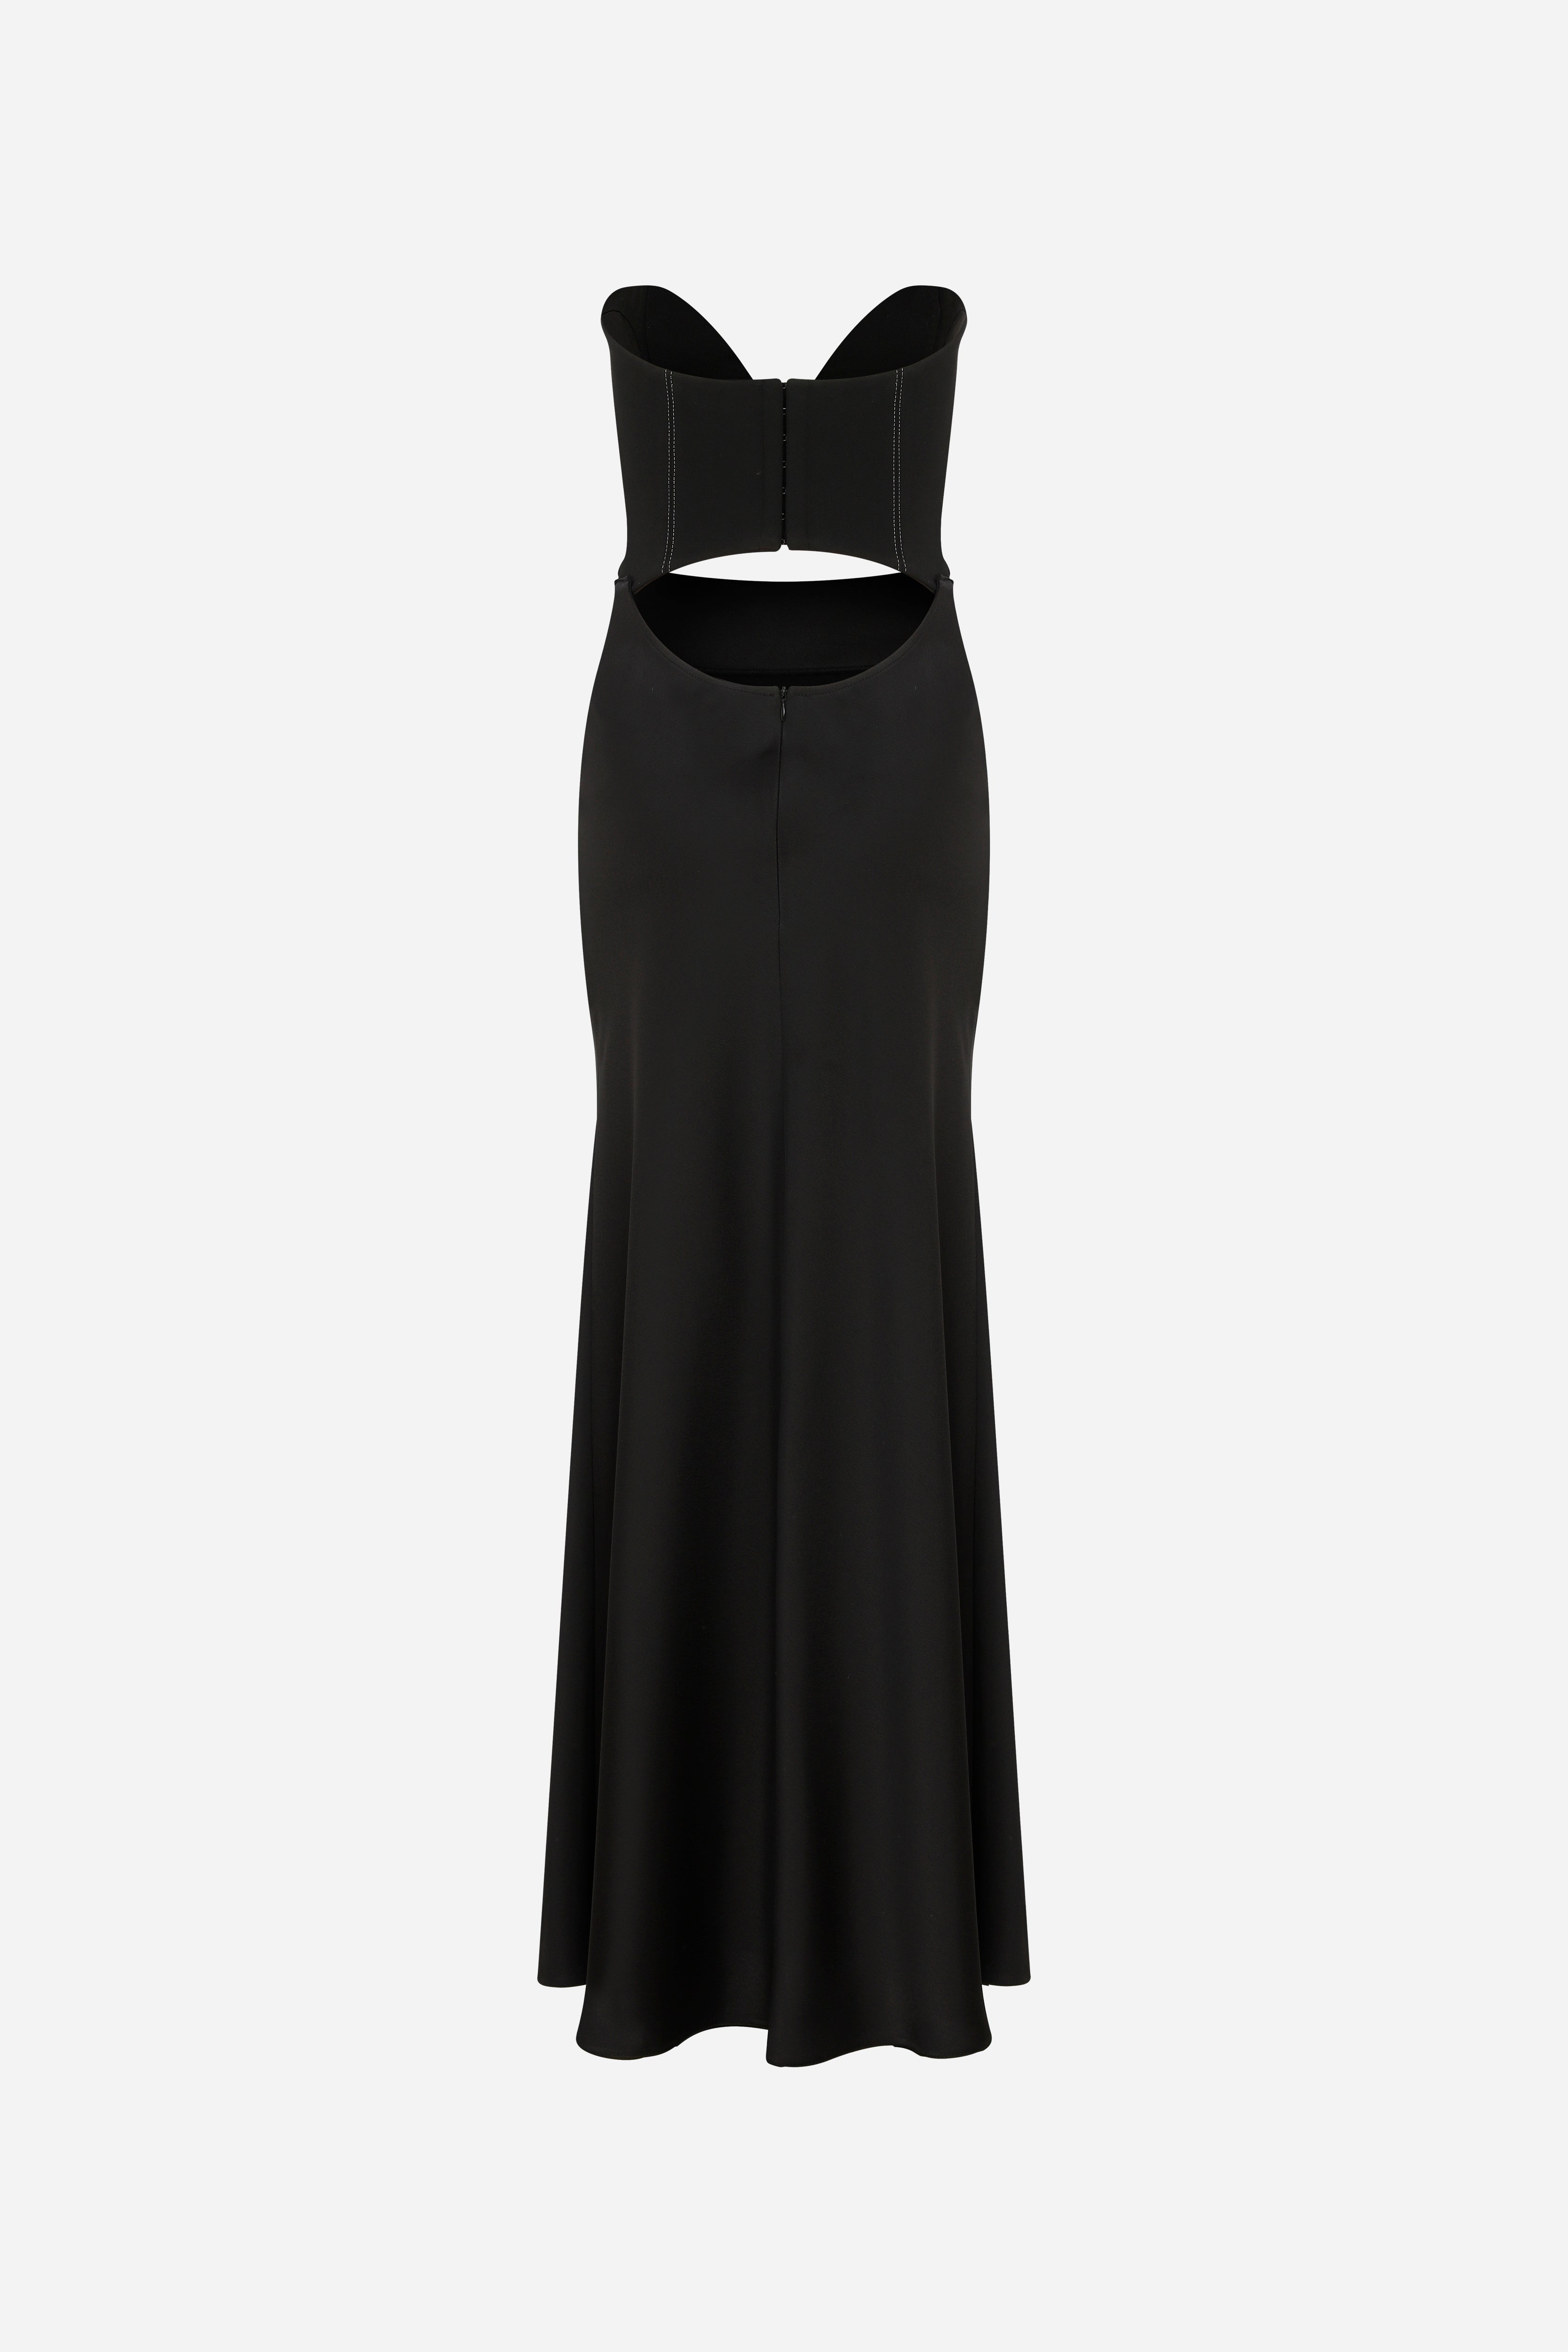 Pina - Corsetry Inspired Strapless Maxi Dress